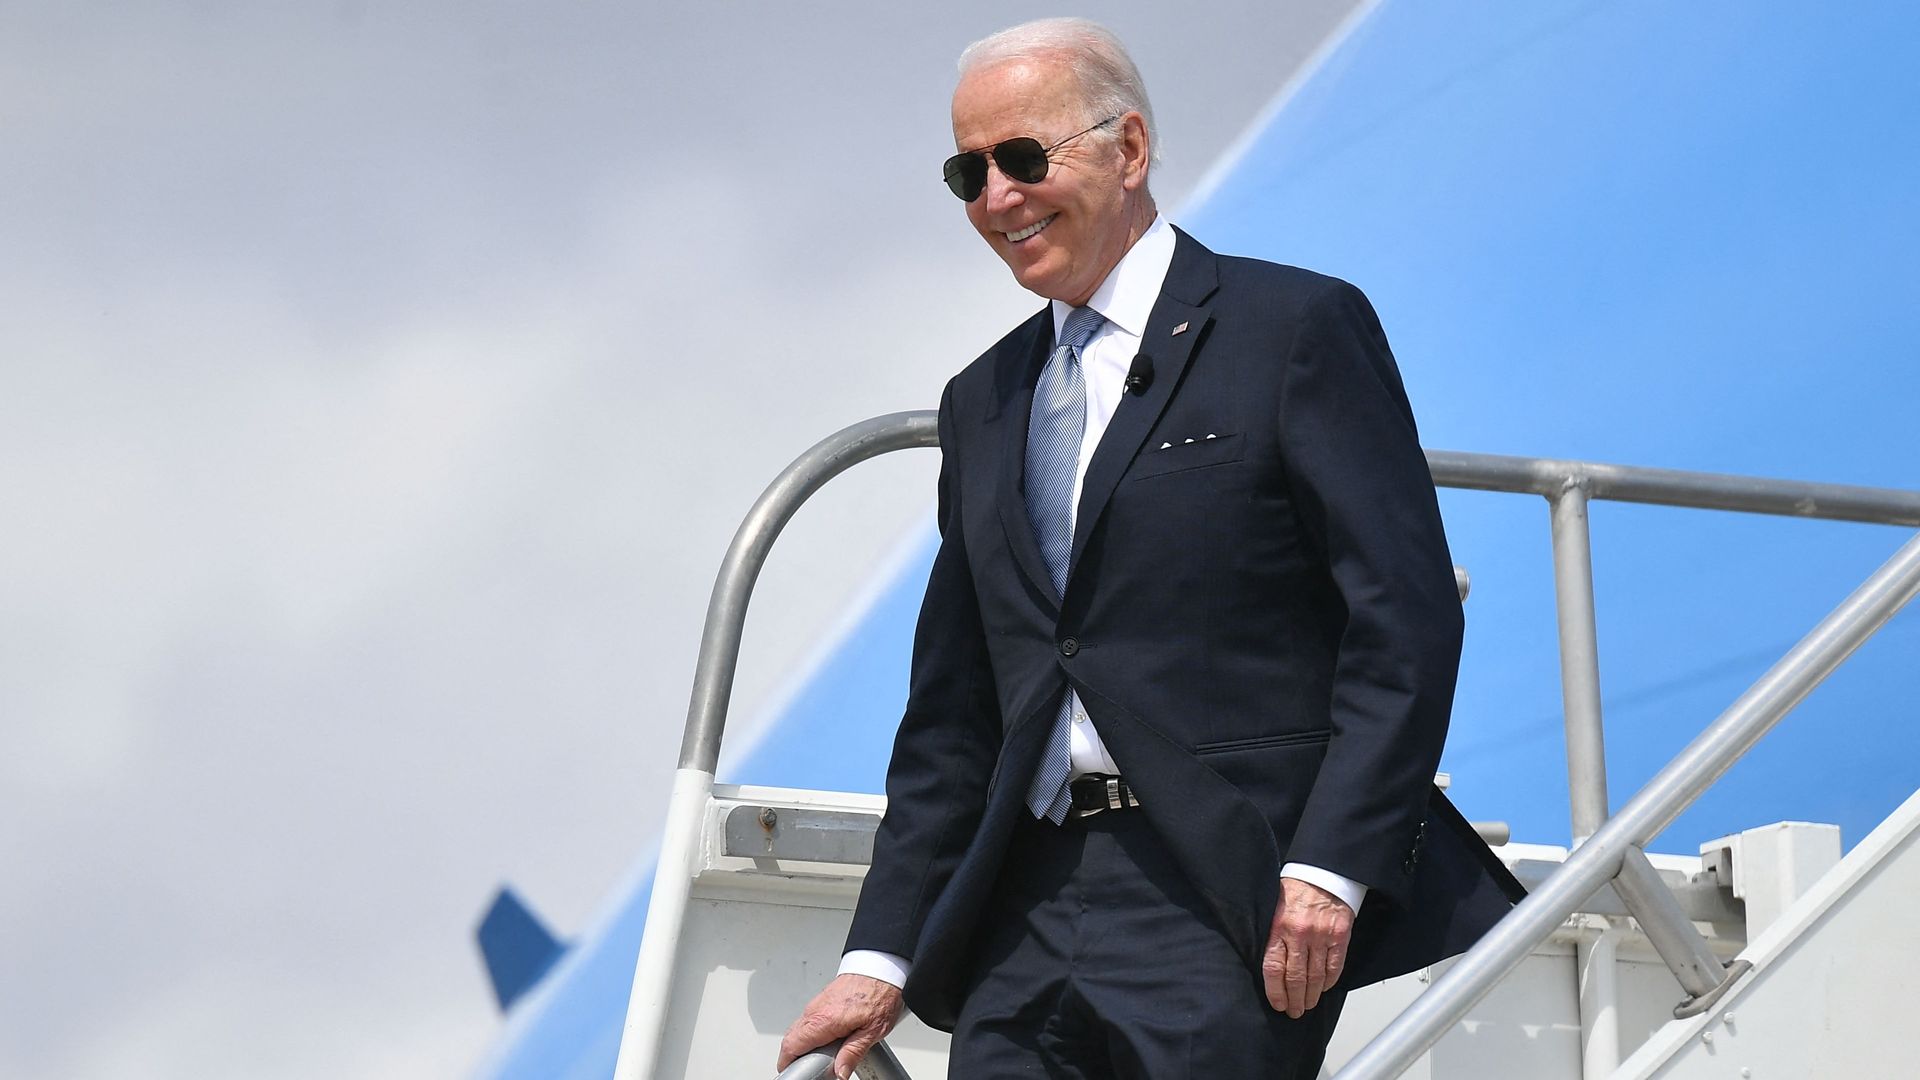 President Biden is seen stepping off Air Force One in Portland, Ore.